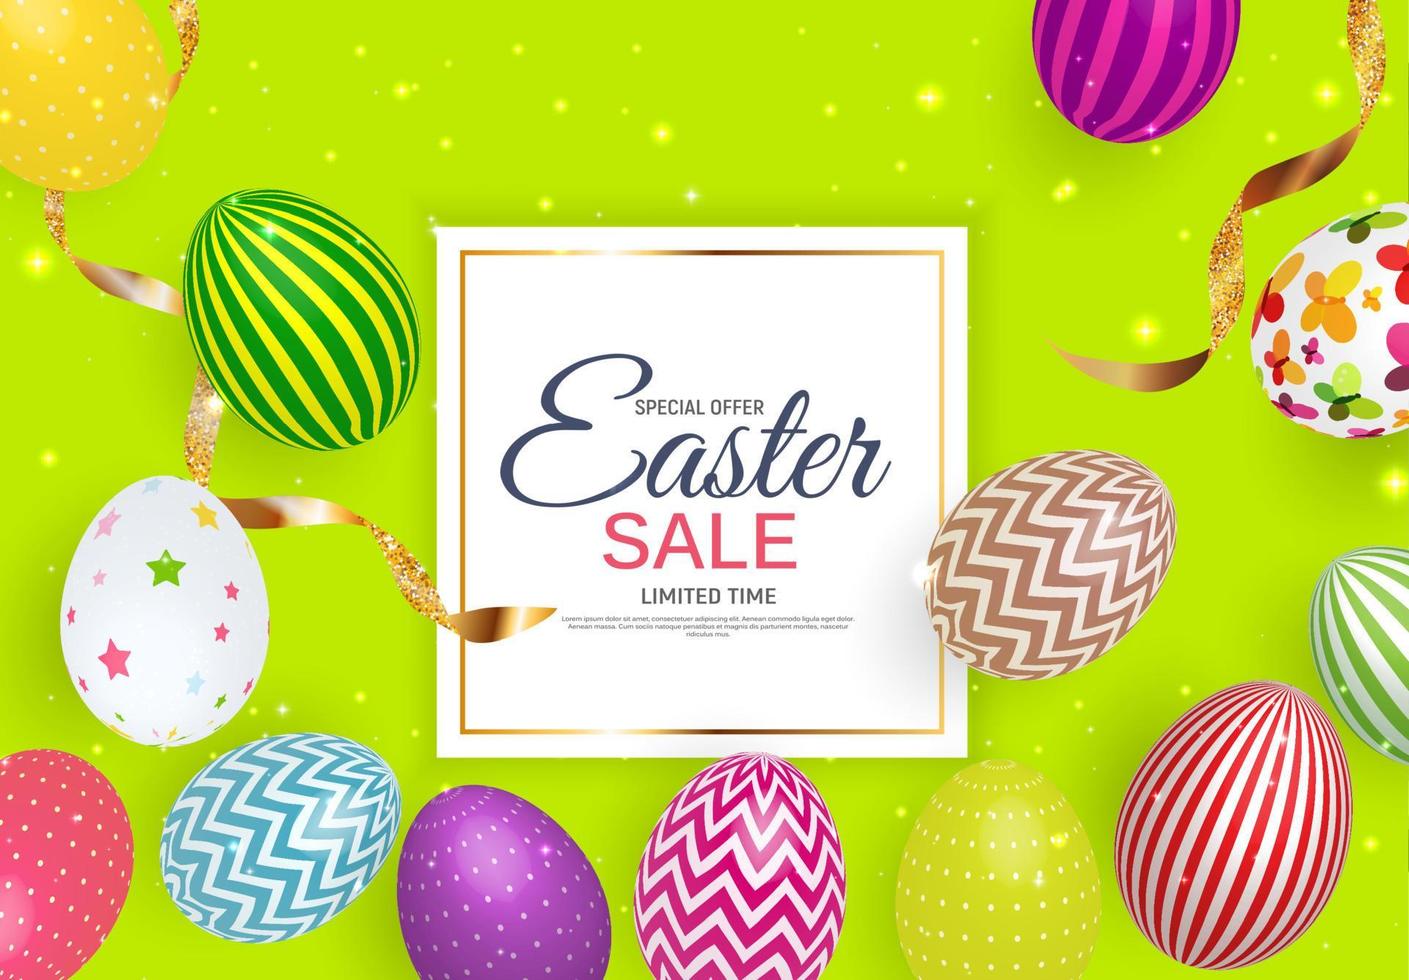 Abstract Easter Sale Template Background Vector Illustration